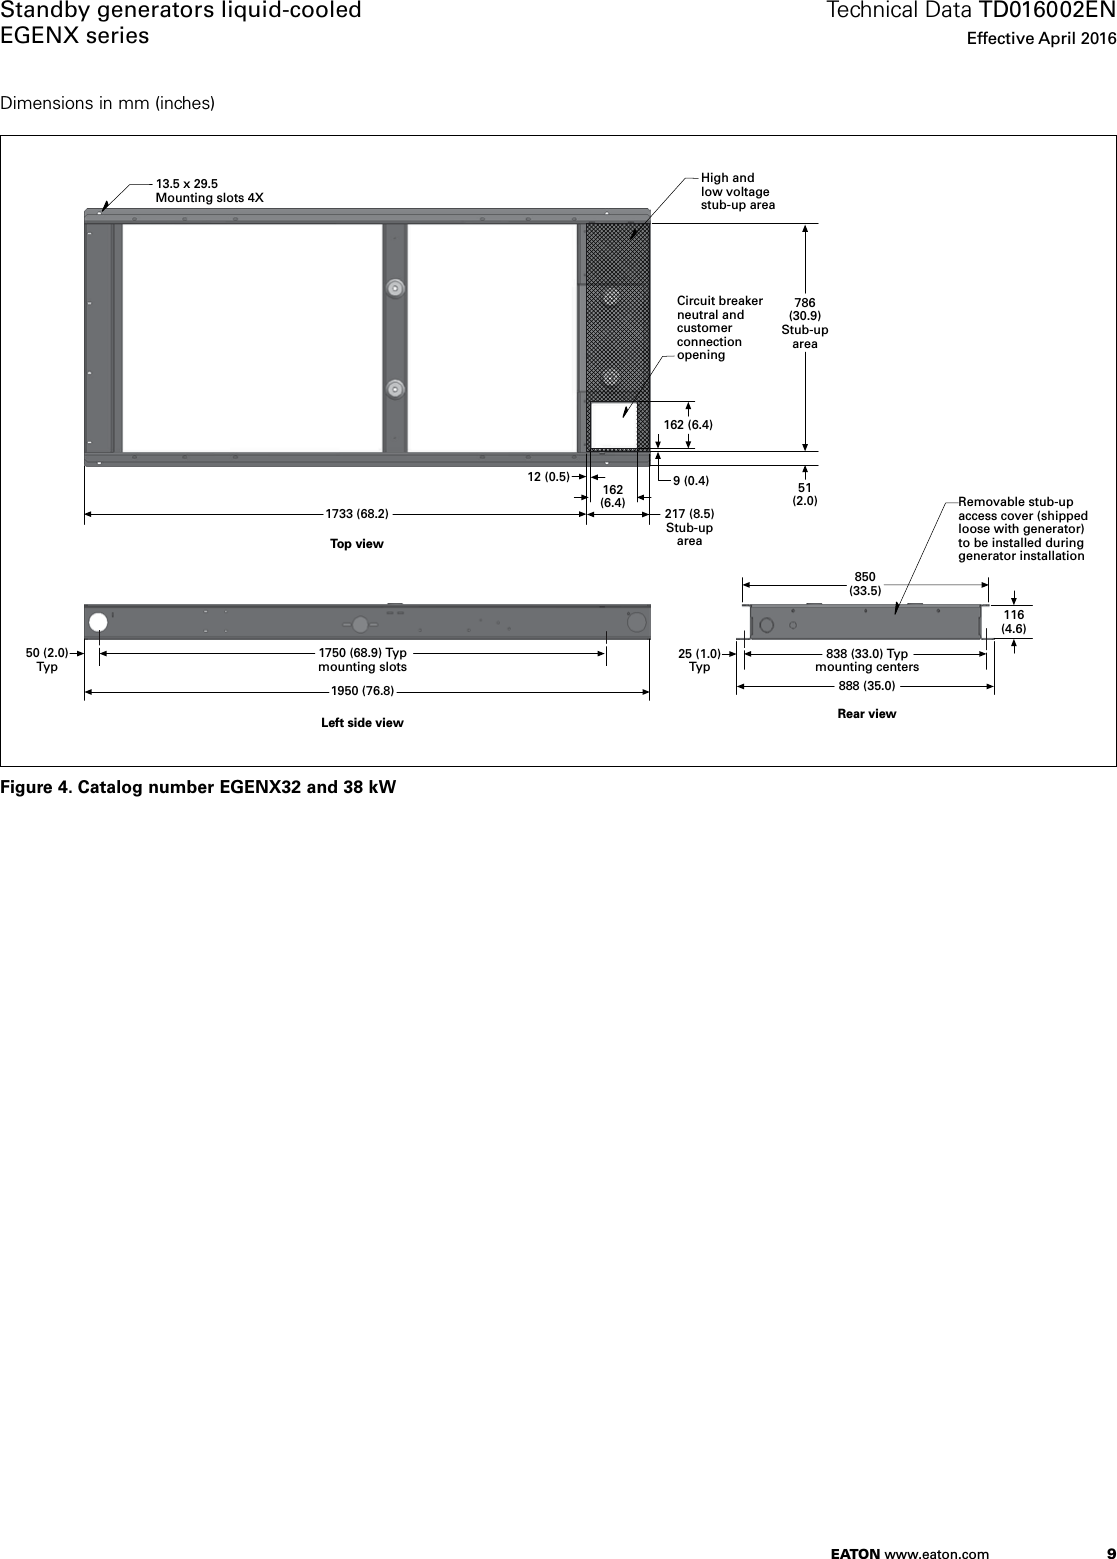 Page 9 of 12 - Product Detail Manual 